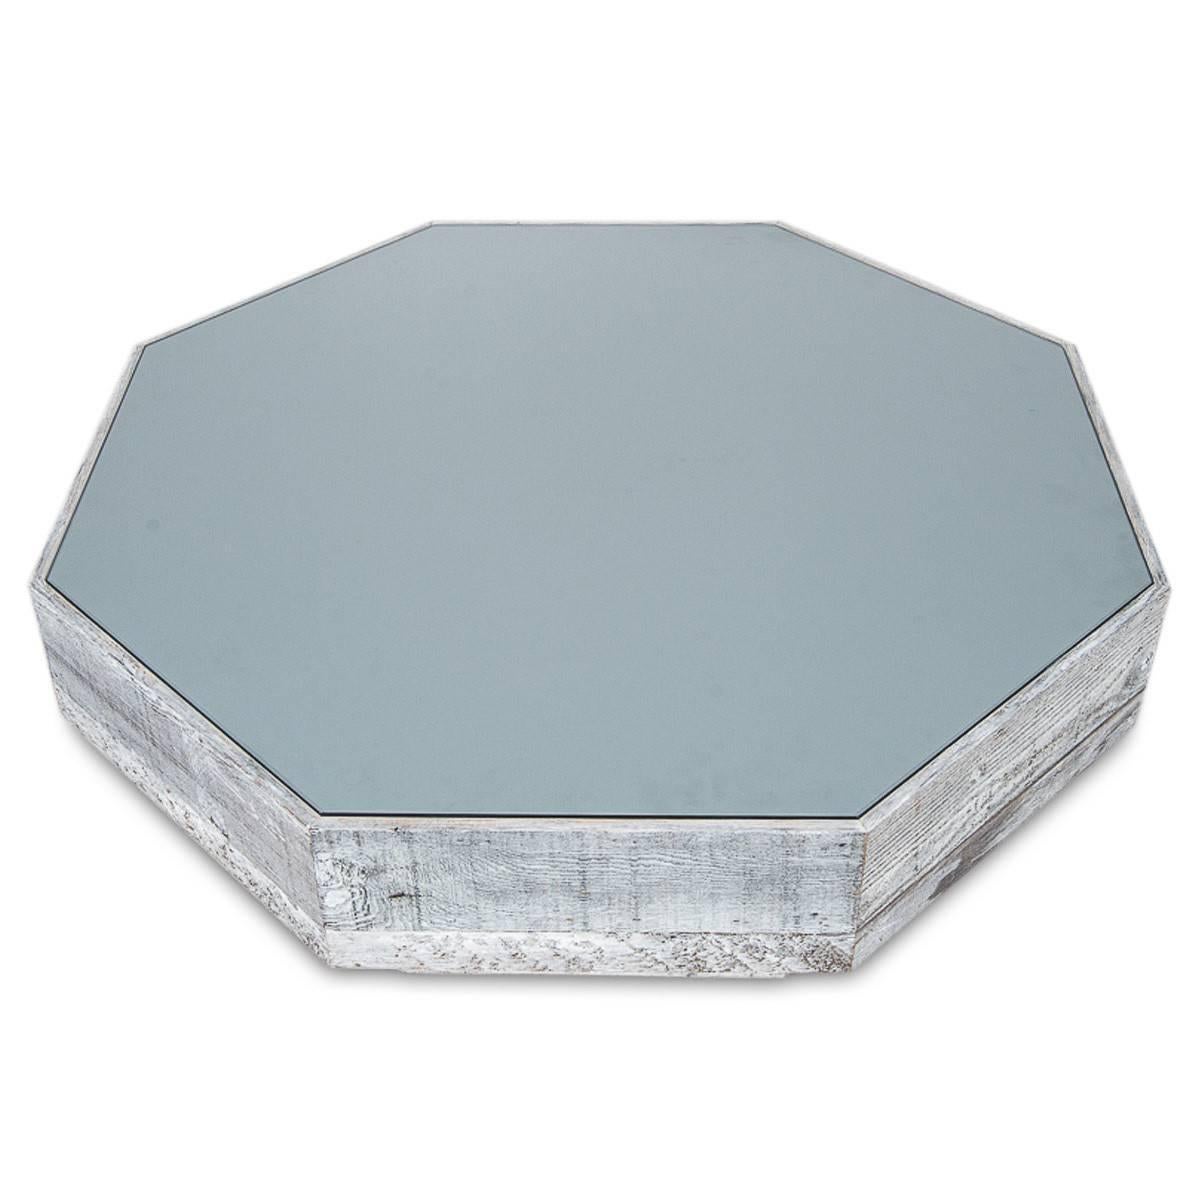 Recycled wood octagon coffee table has been updated with wood salvaged and repurposed. Shown here with grey glass, custom color options are available.

Dimensions:

44